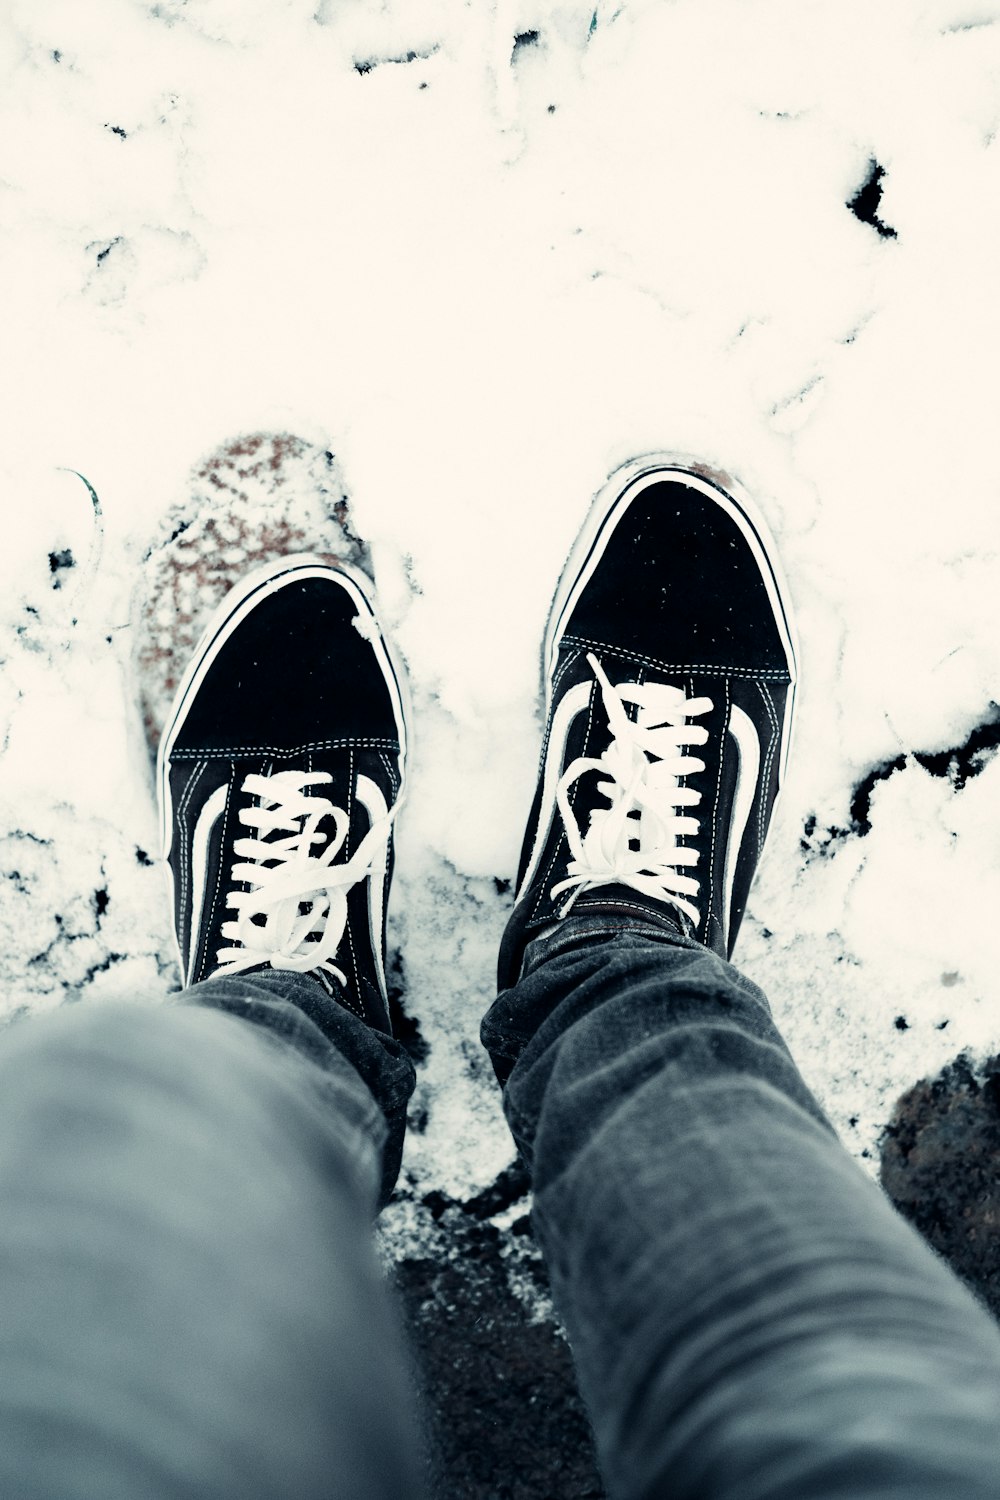 person in gray pants wearing blue and white converse all star sneakers  photo – Free Stuttgart Image on Unsplash